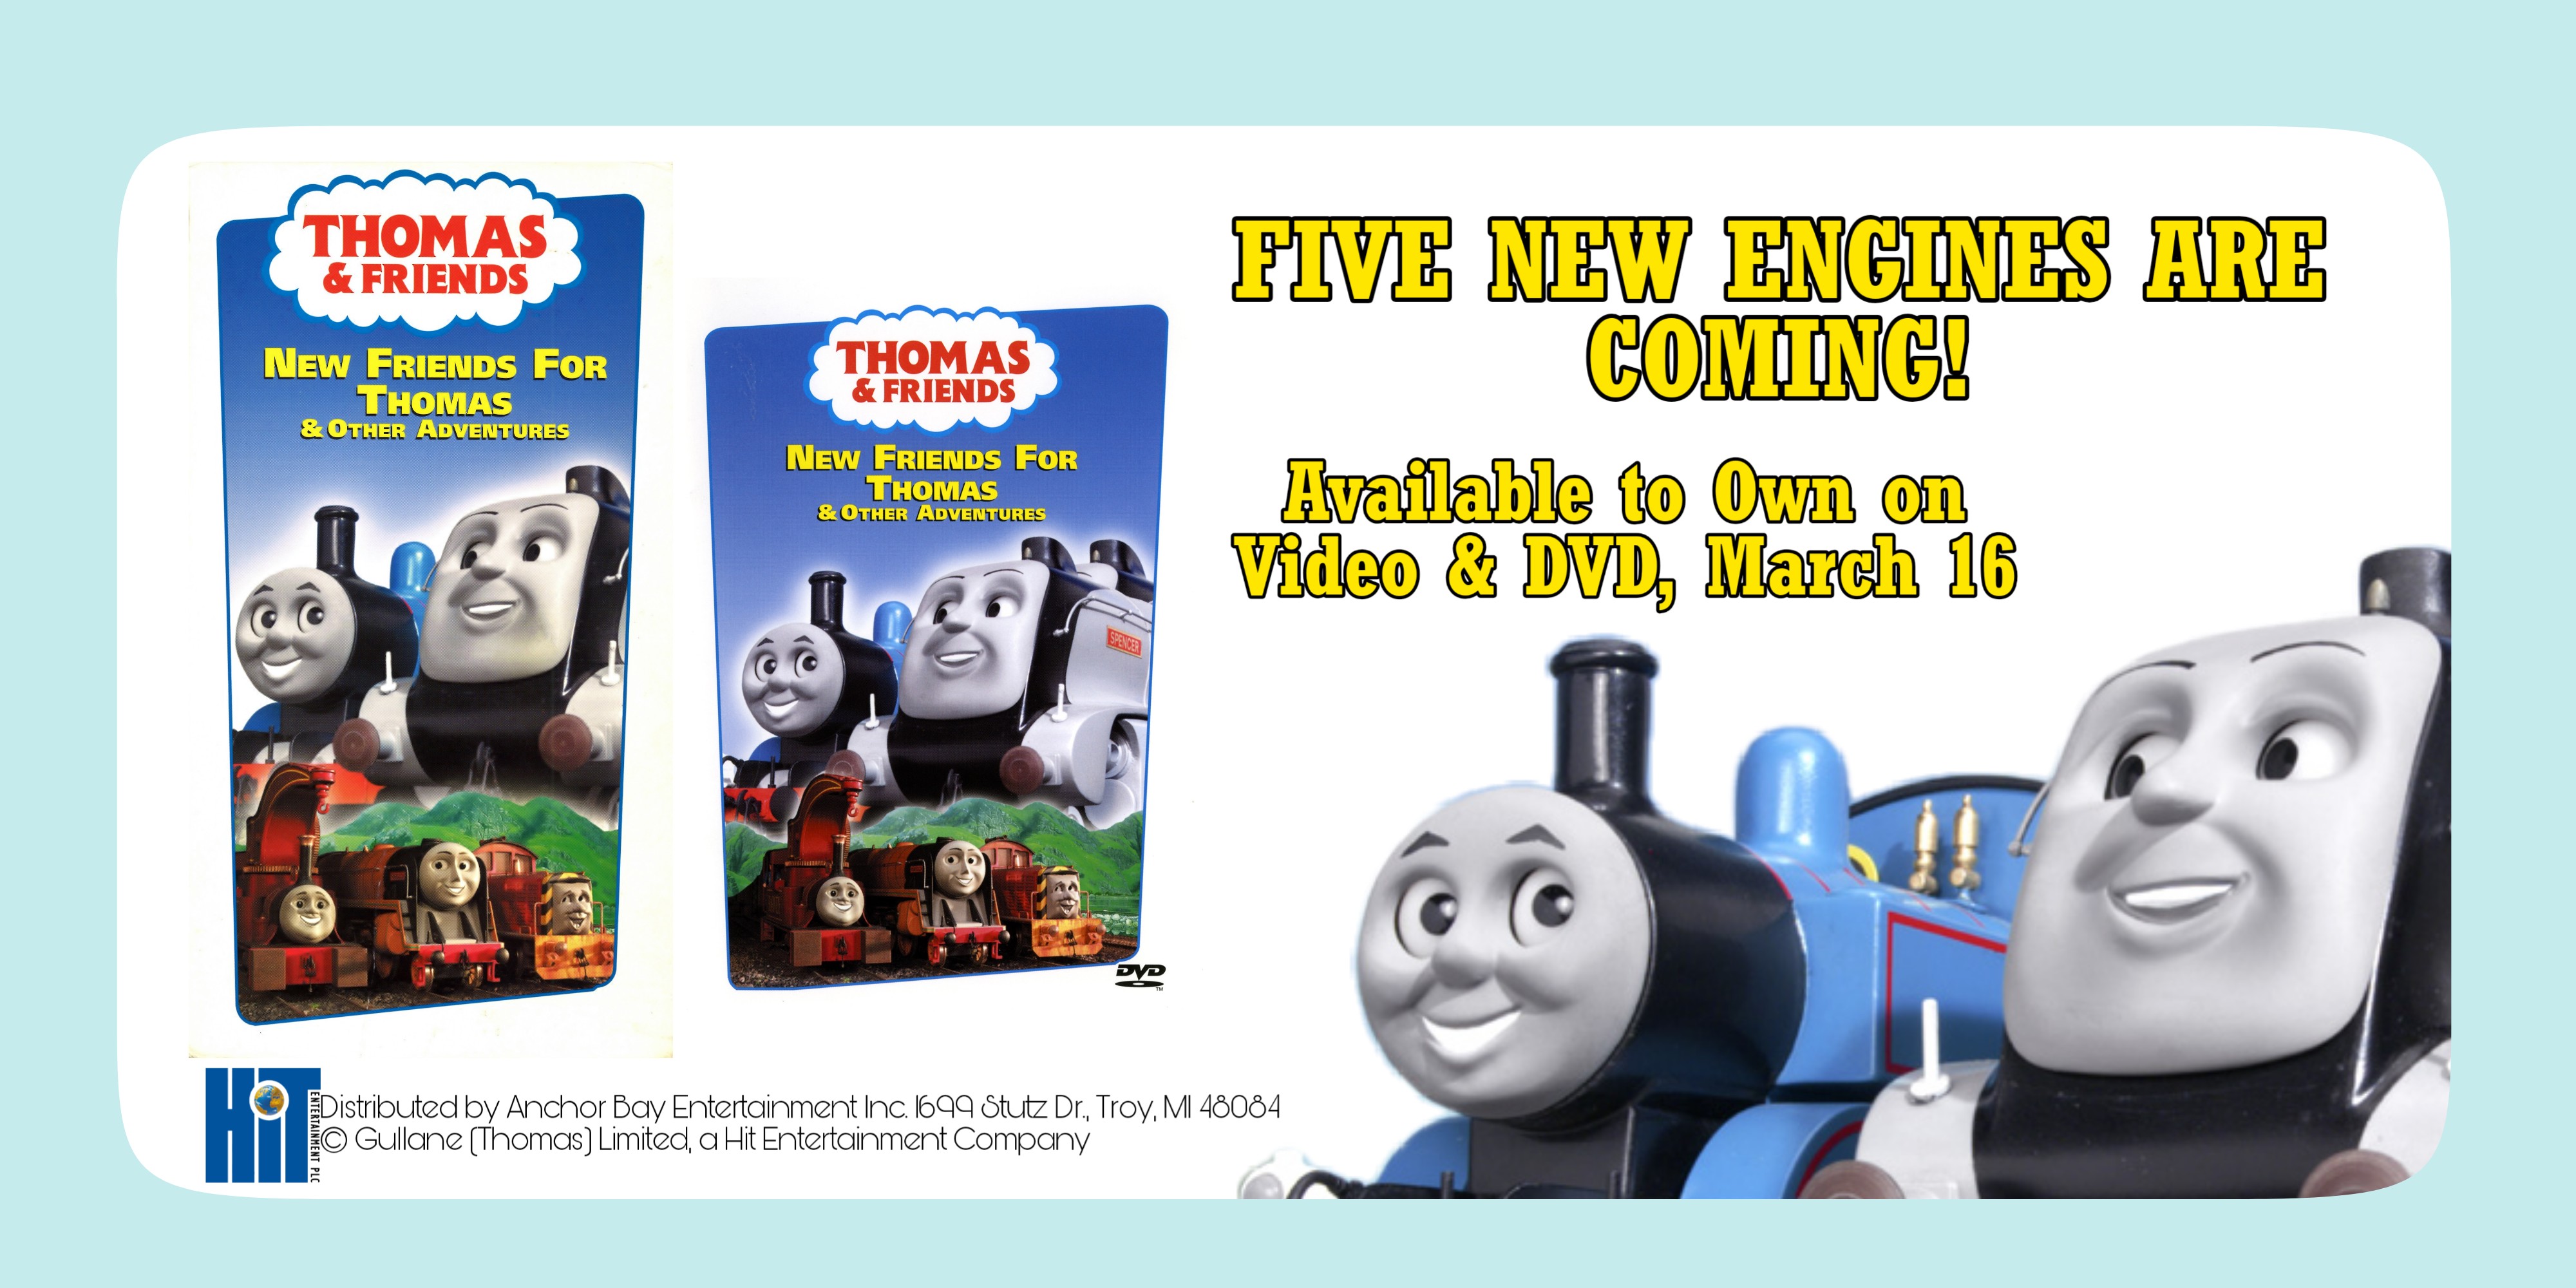 Custom Thomas And Friends Vhs Dvd Ad Poster 2 By Nickthedragon2002 On Deviantart